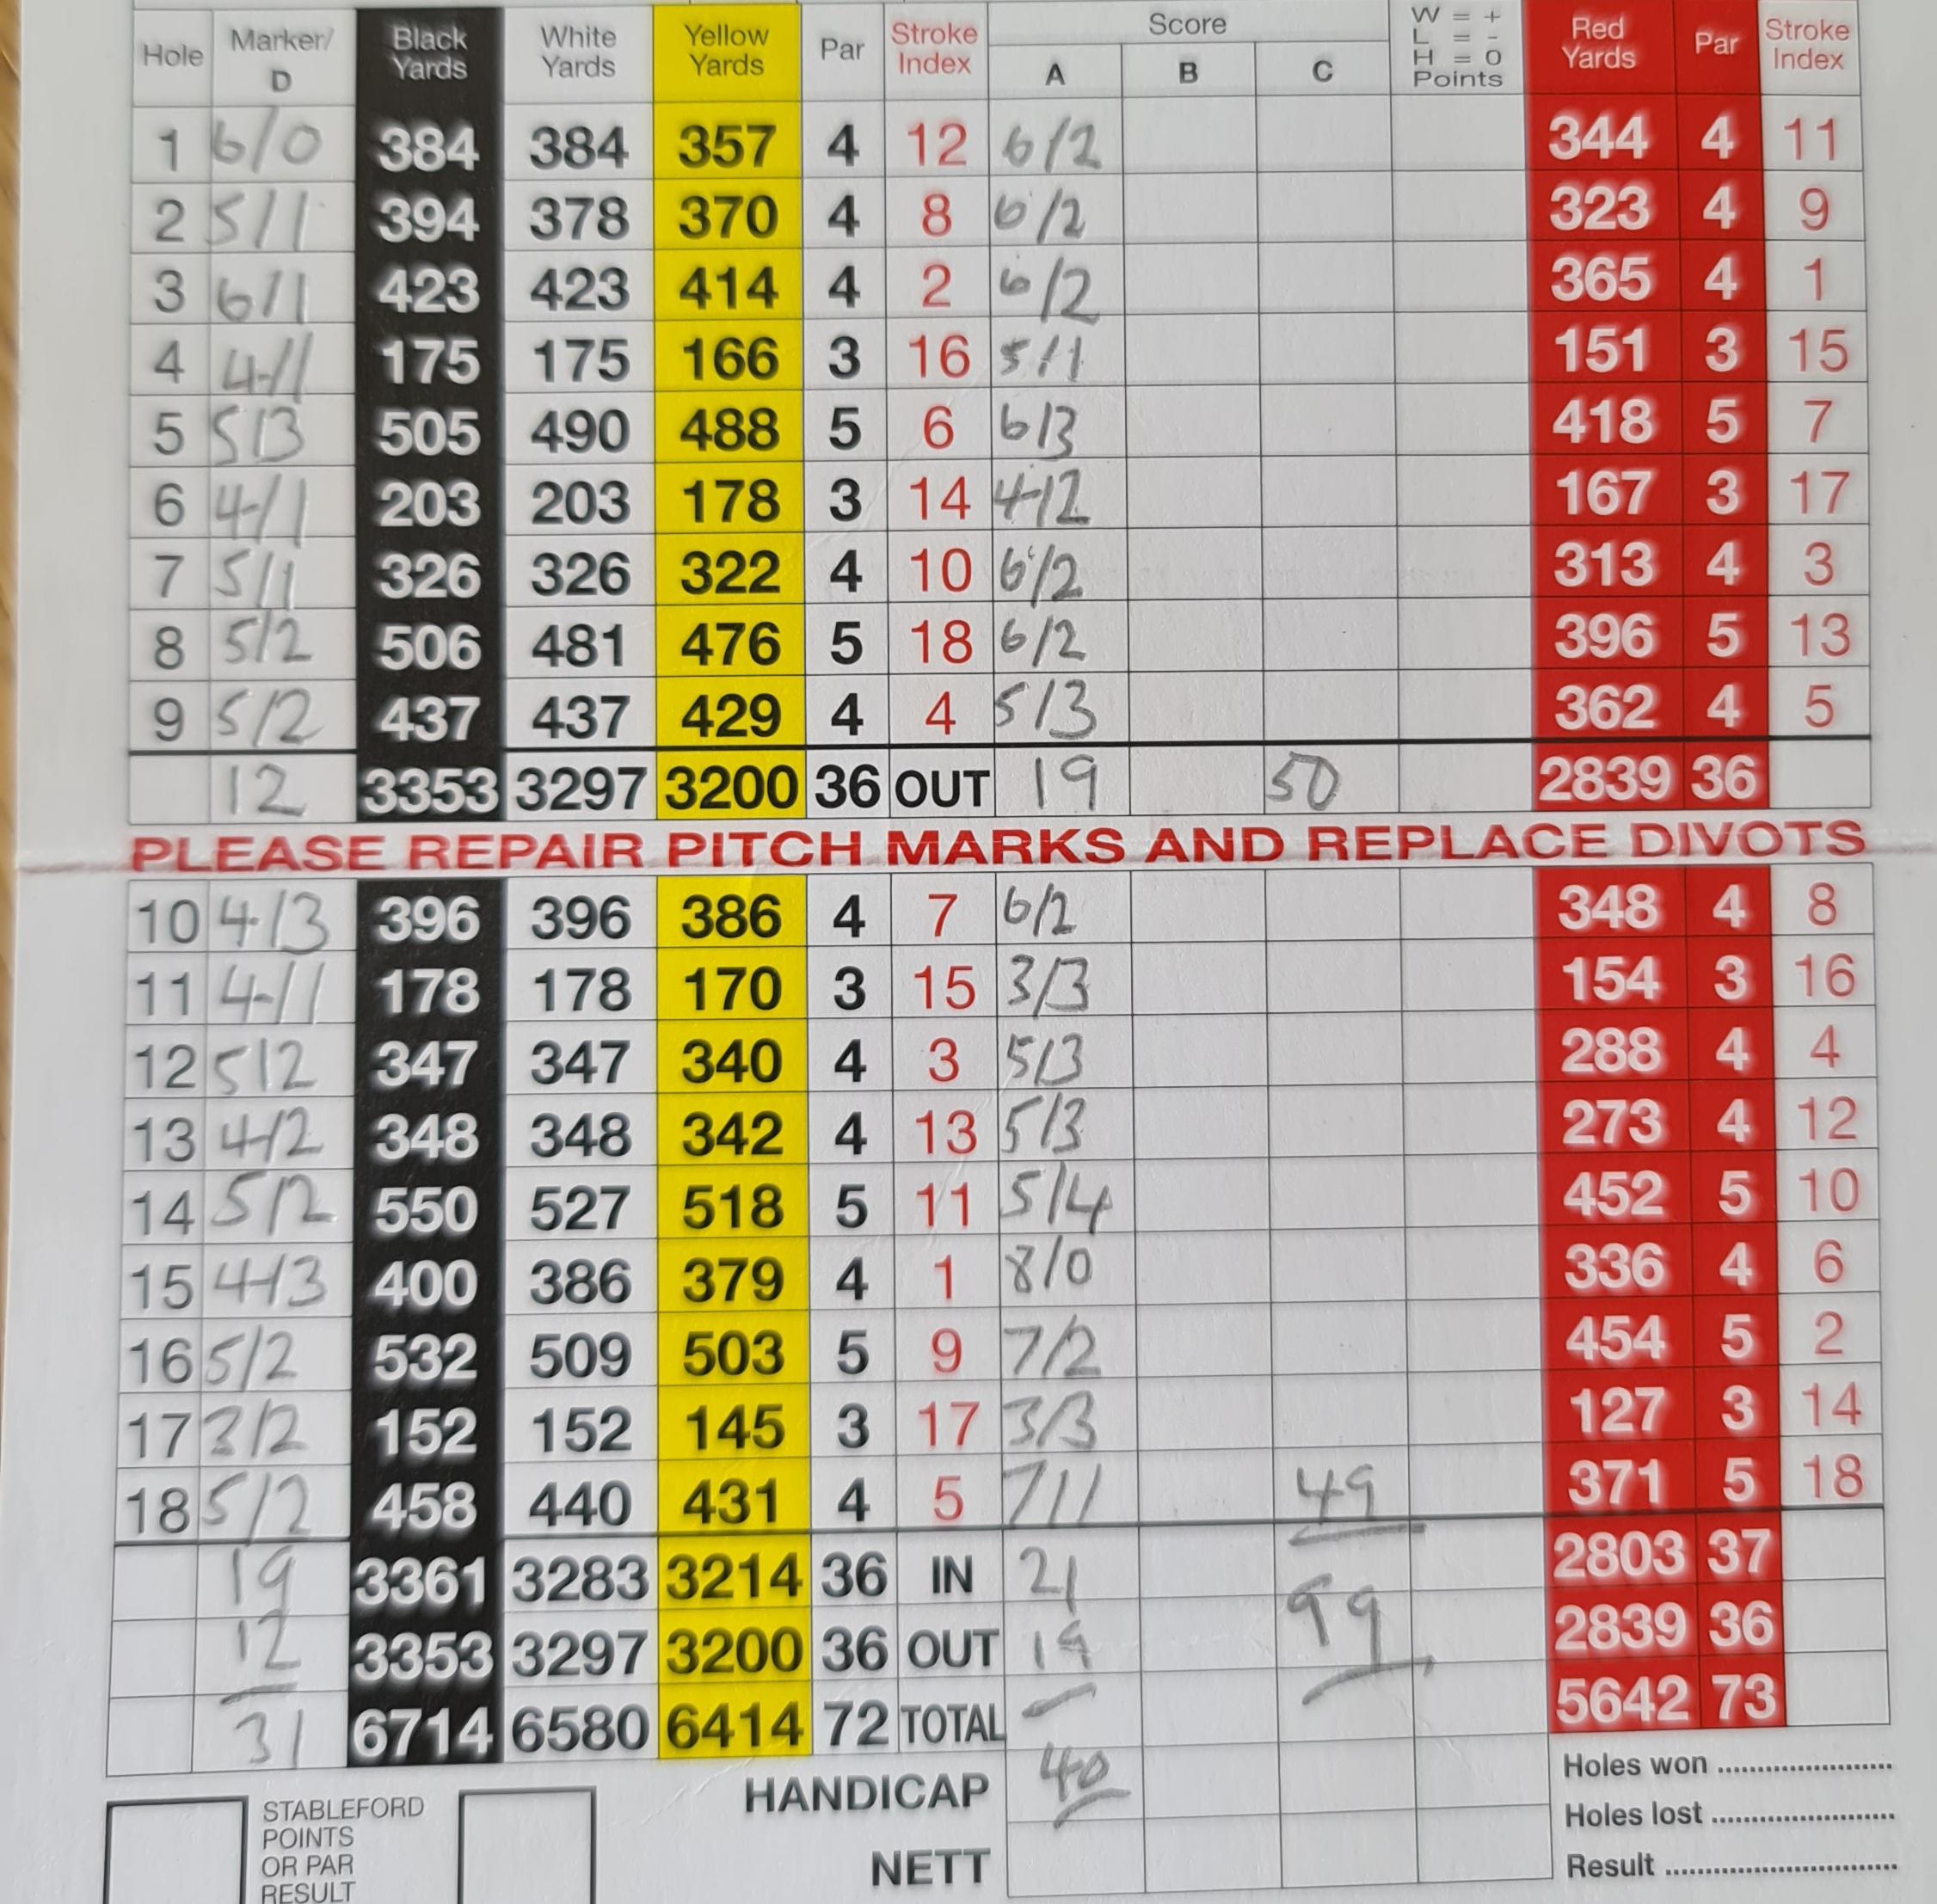 I'm 23 and been playing golf for just over a year now. My handicap is 31 and today I broke 100 for the first time, the best thing is I left so many shots out on the course!